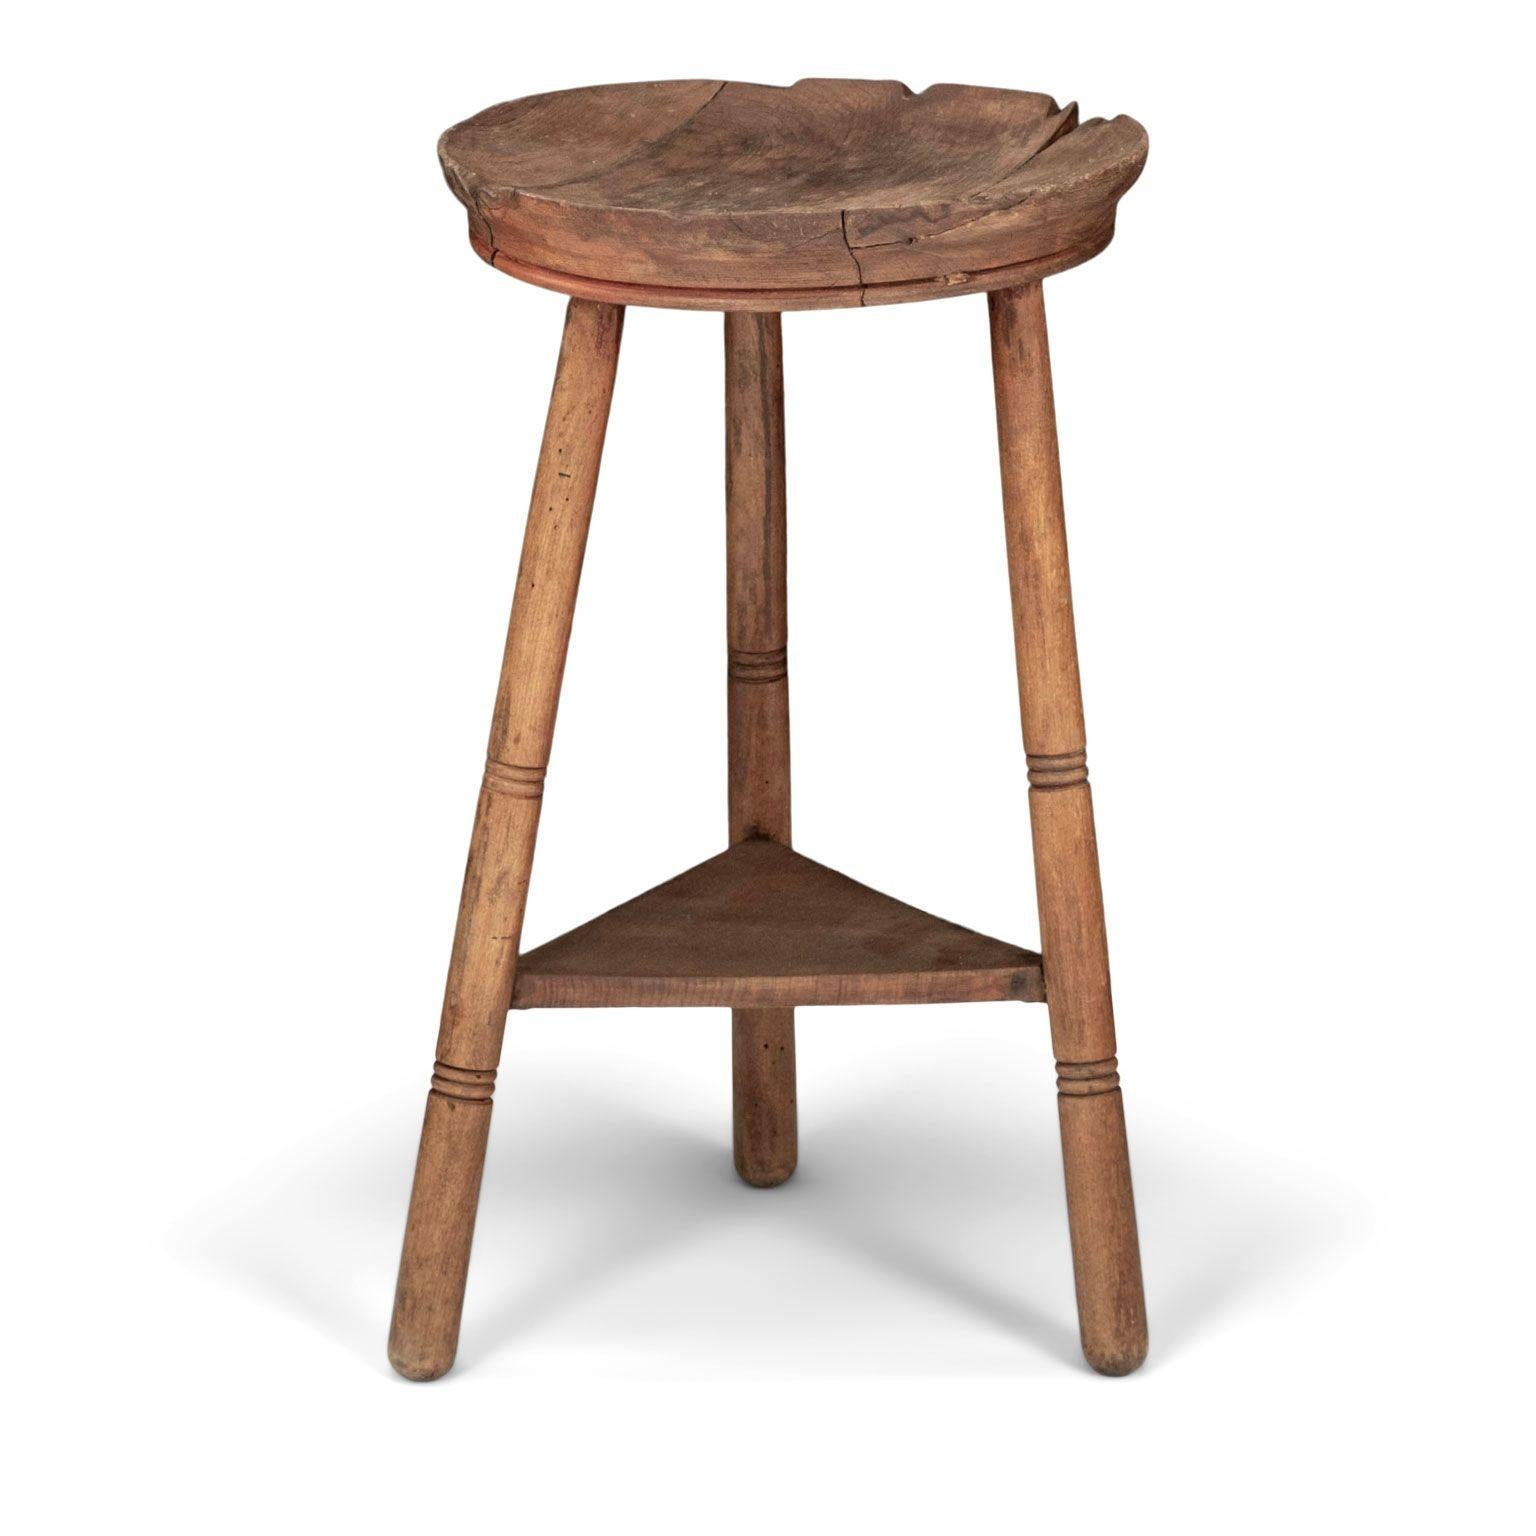 English Arts and Crafts Concave-Seated Stool